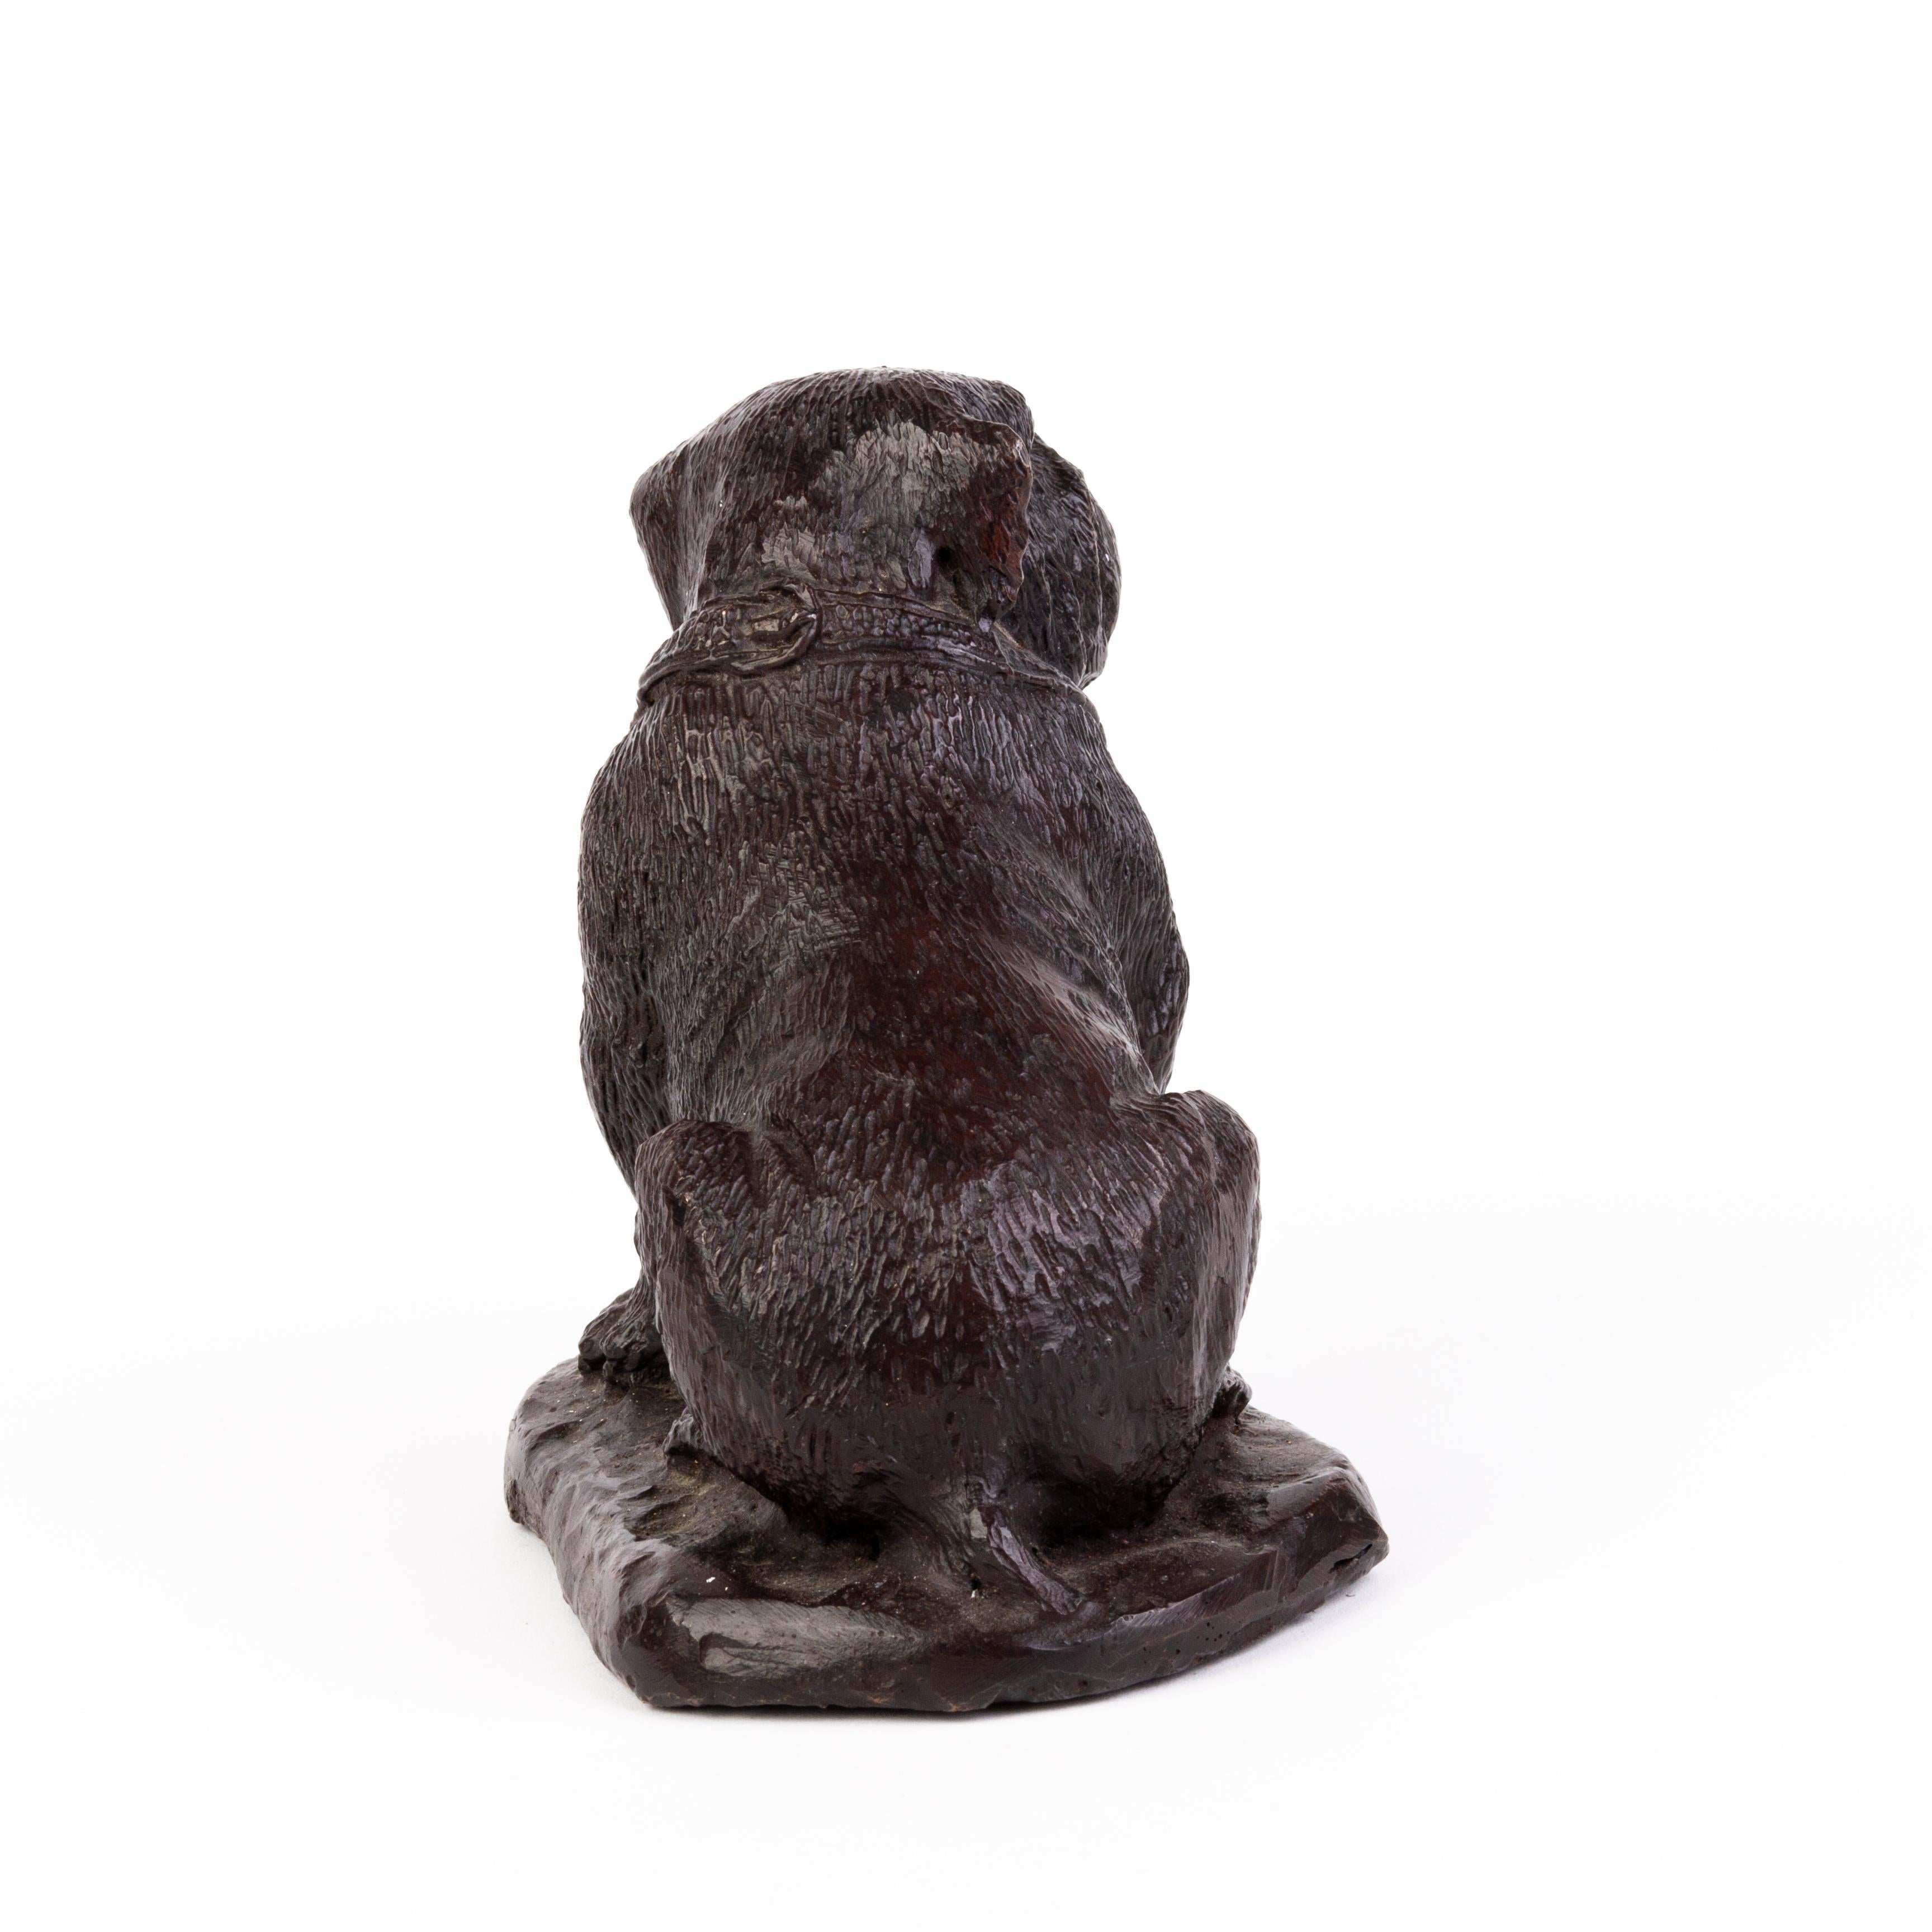 Victorian English Fine Bronze Sculpture of a Bulldog 19th Century 
Good condition 
From a private collection.
Free international shipping.